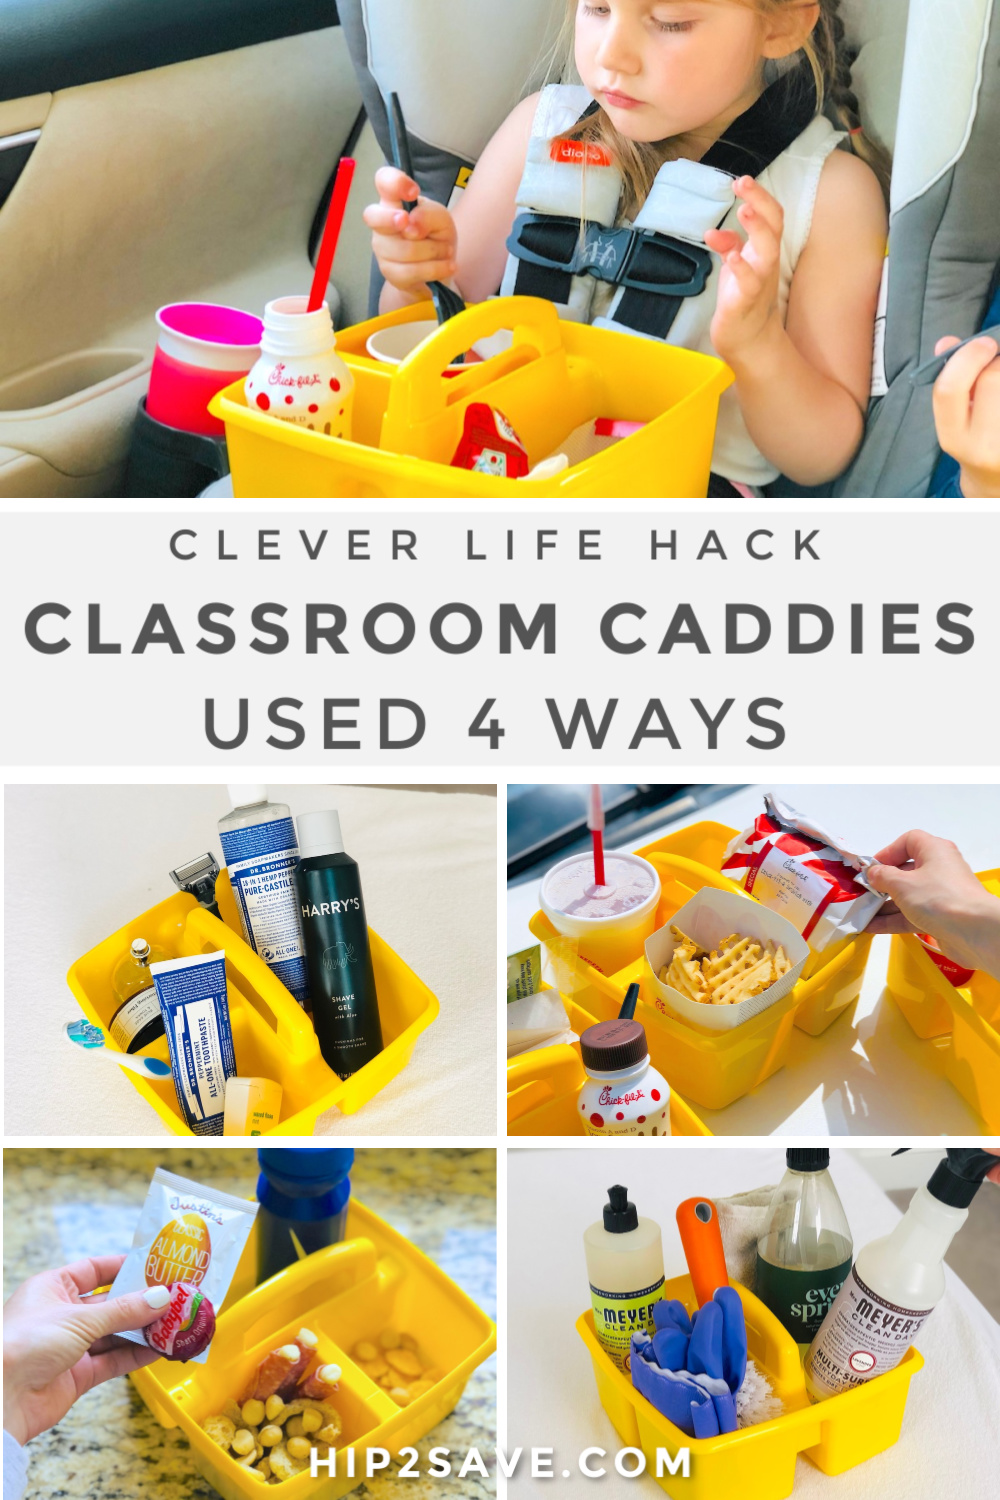 Caddy Organizer Hacks: Fast Food Tray, Cleaning Storage, & More!